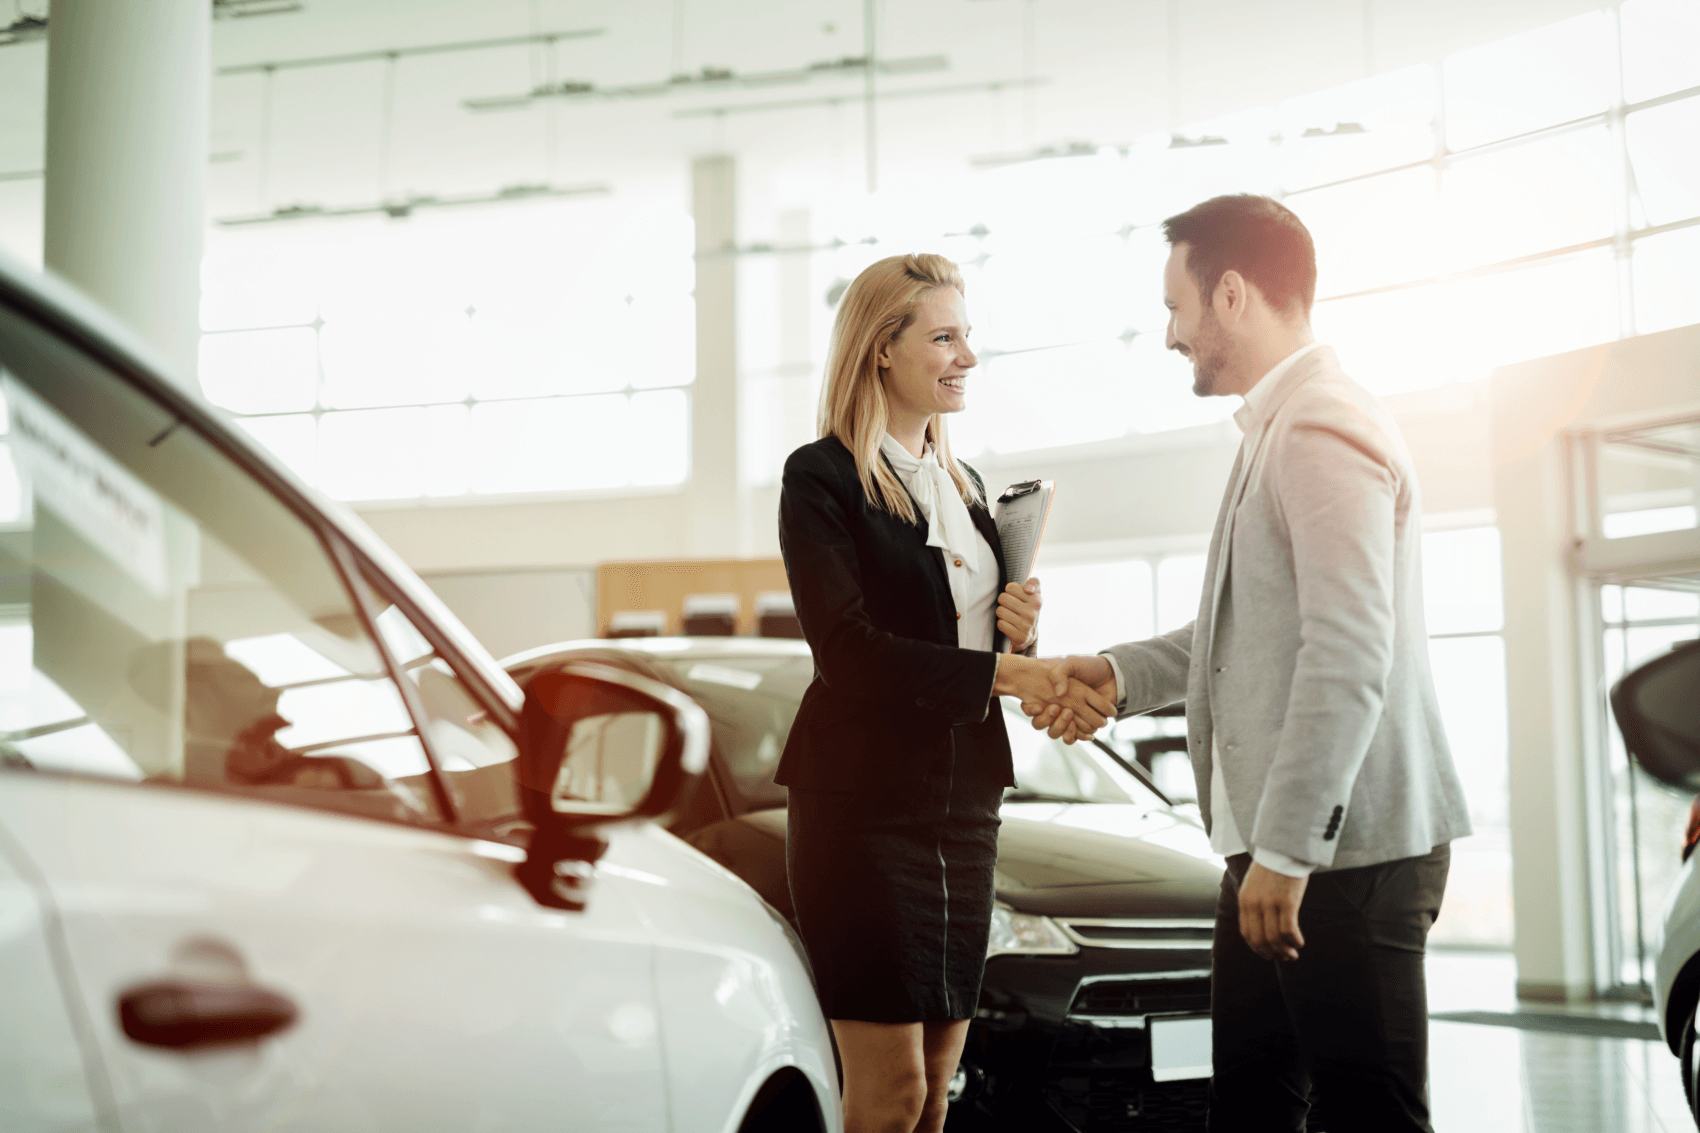 Leasing vs Buying: Which Is Right for You?